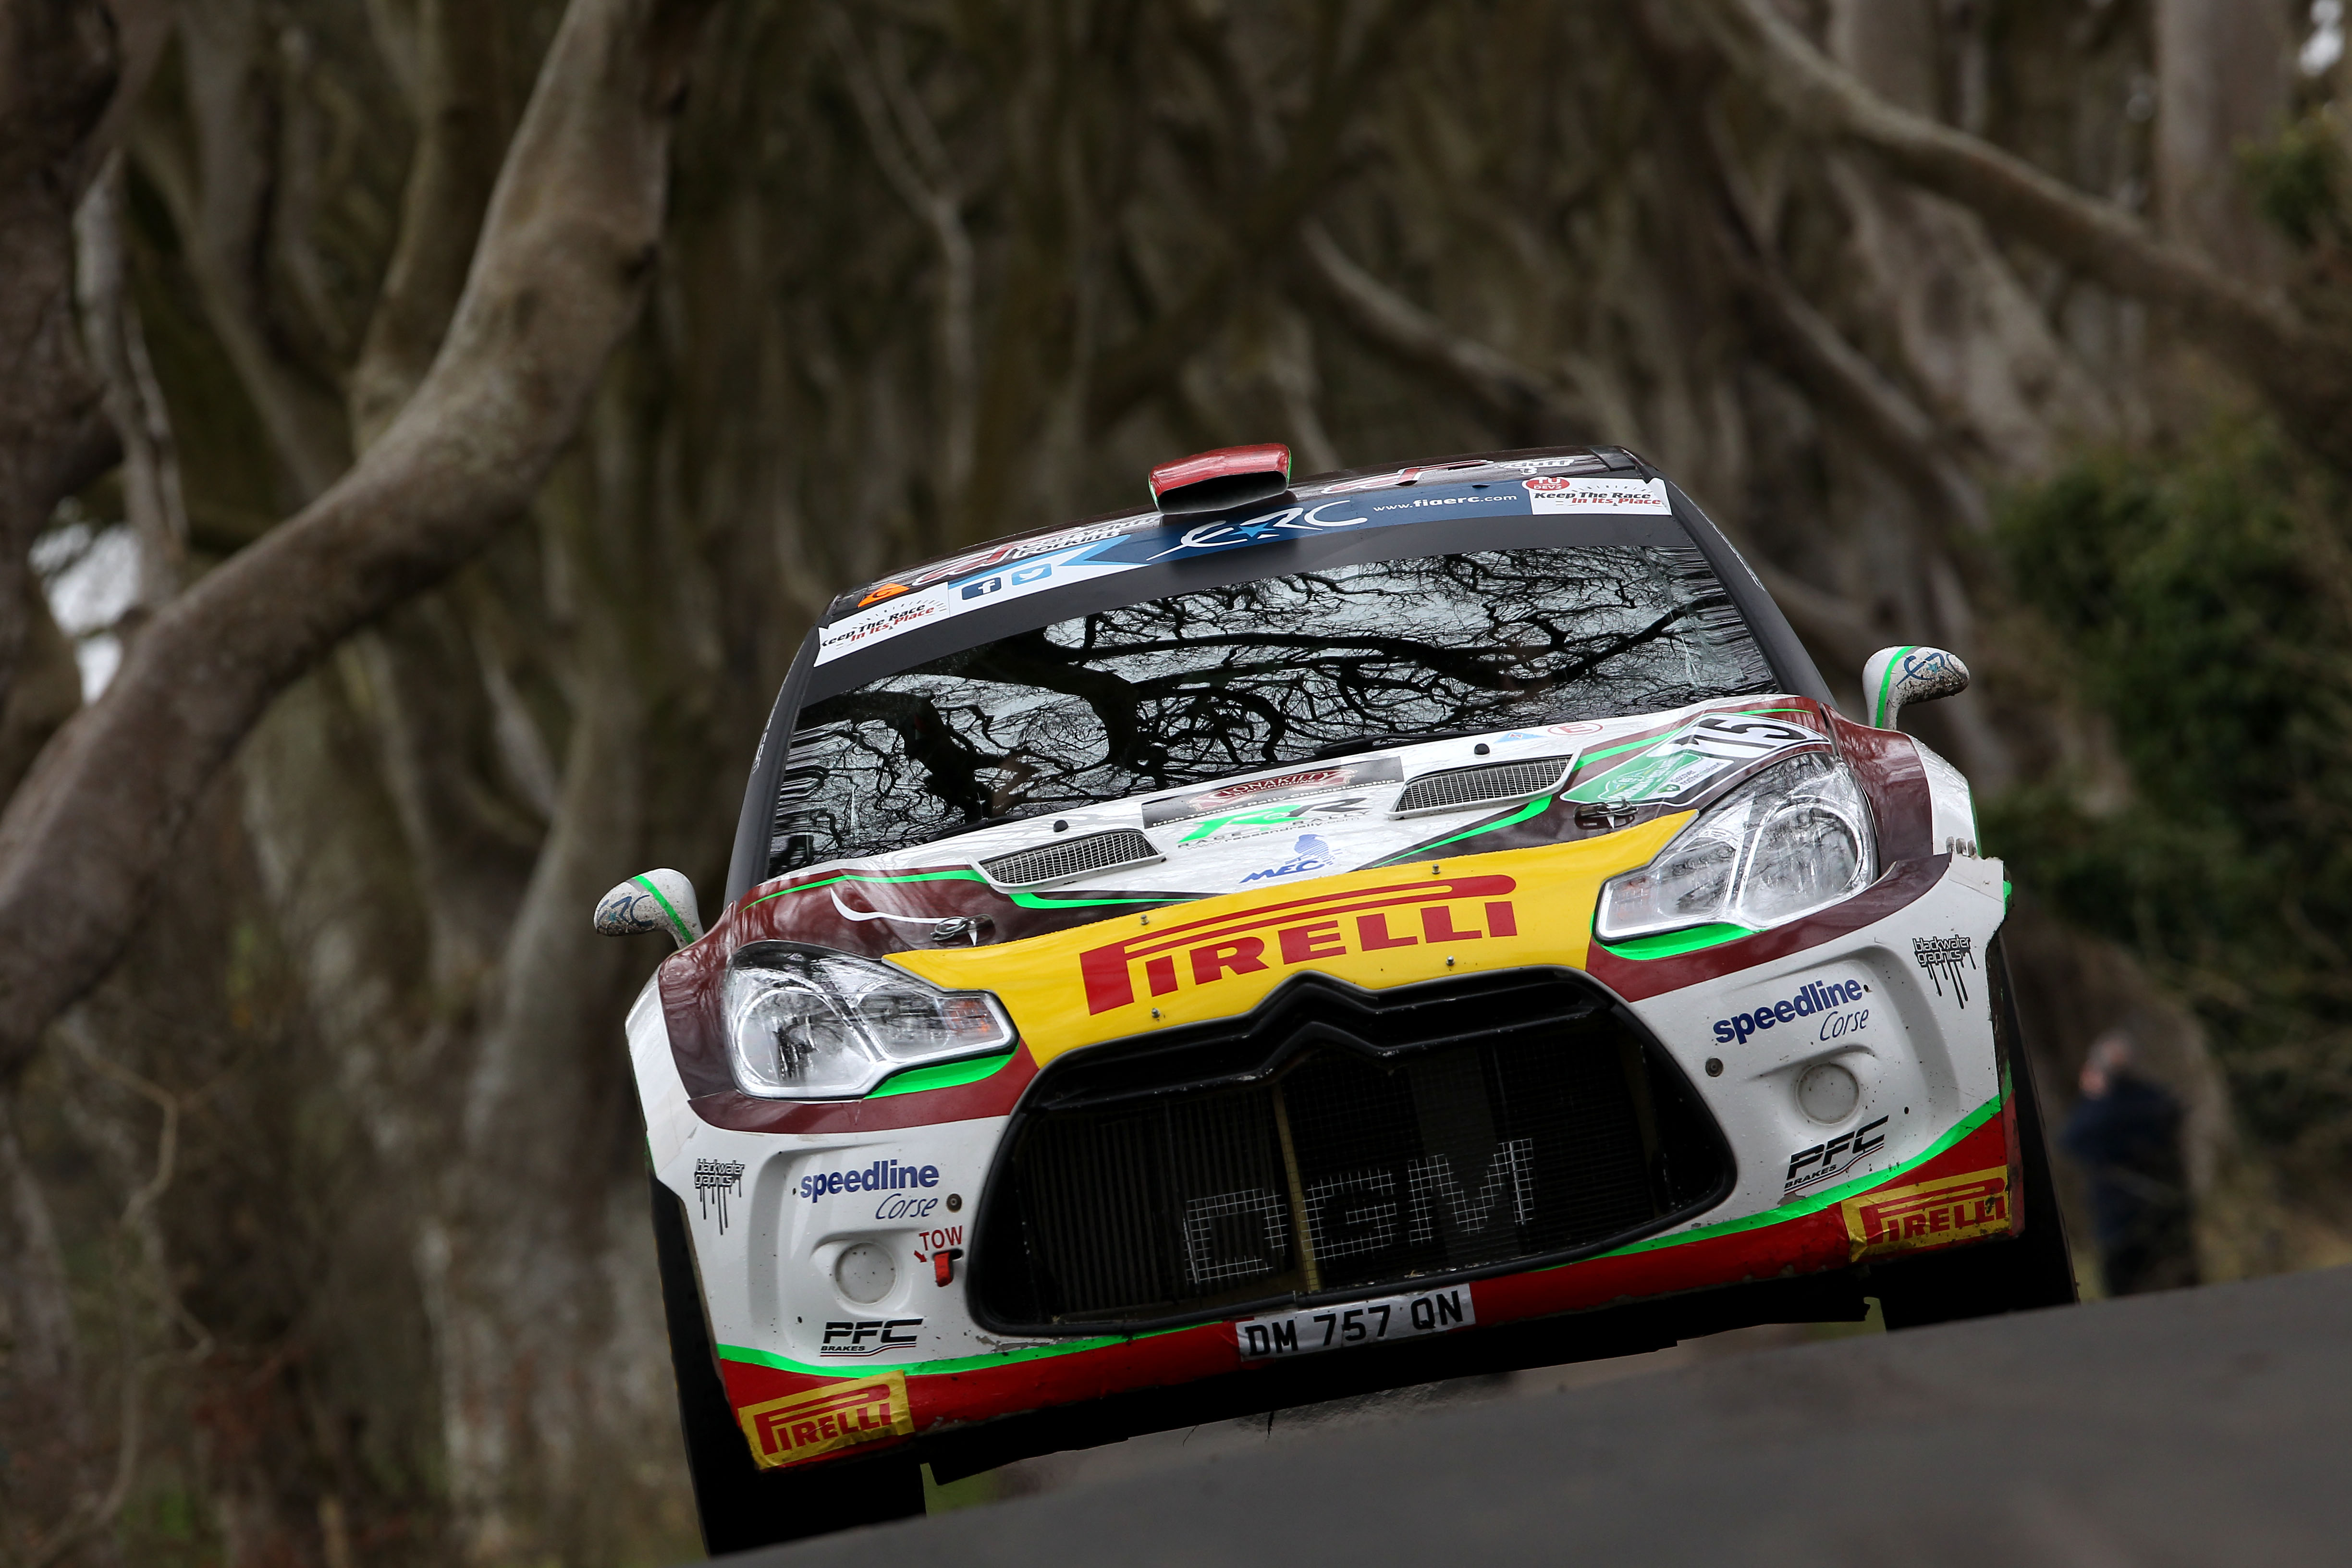 Want to see the WRC in Northern Ireland?